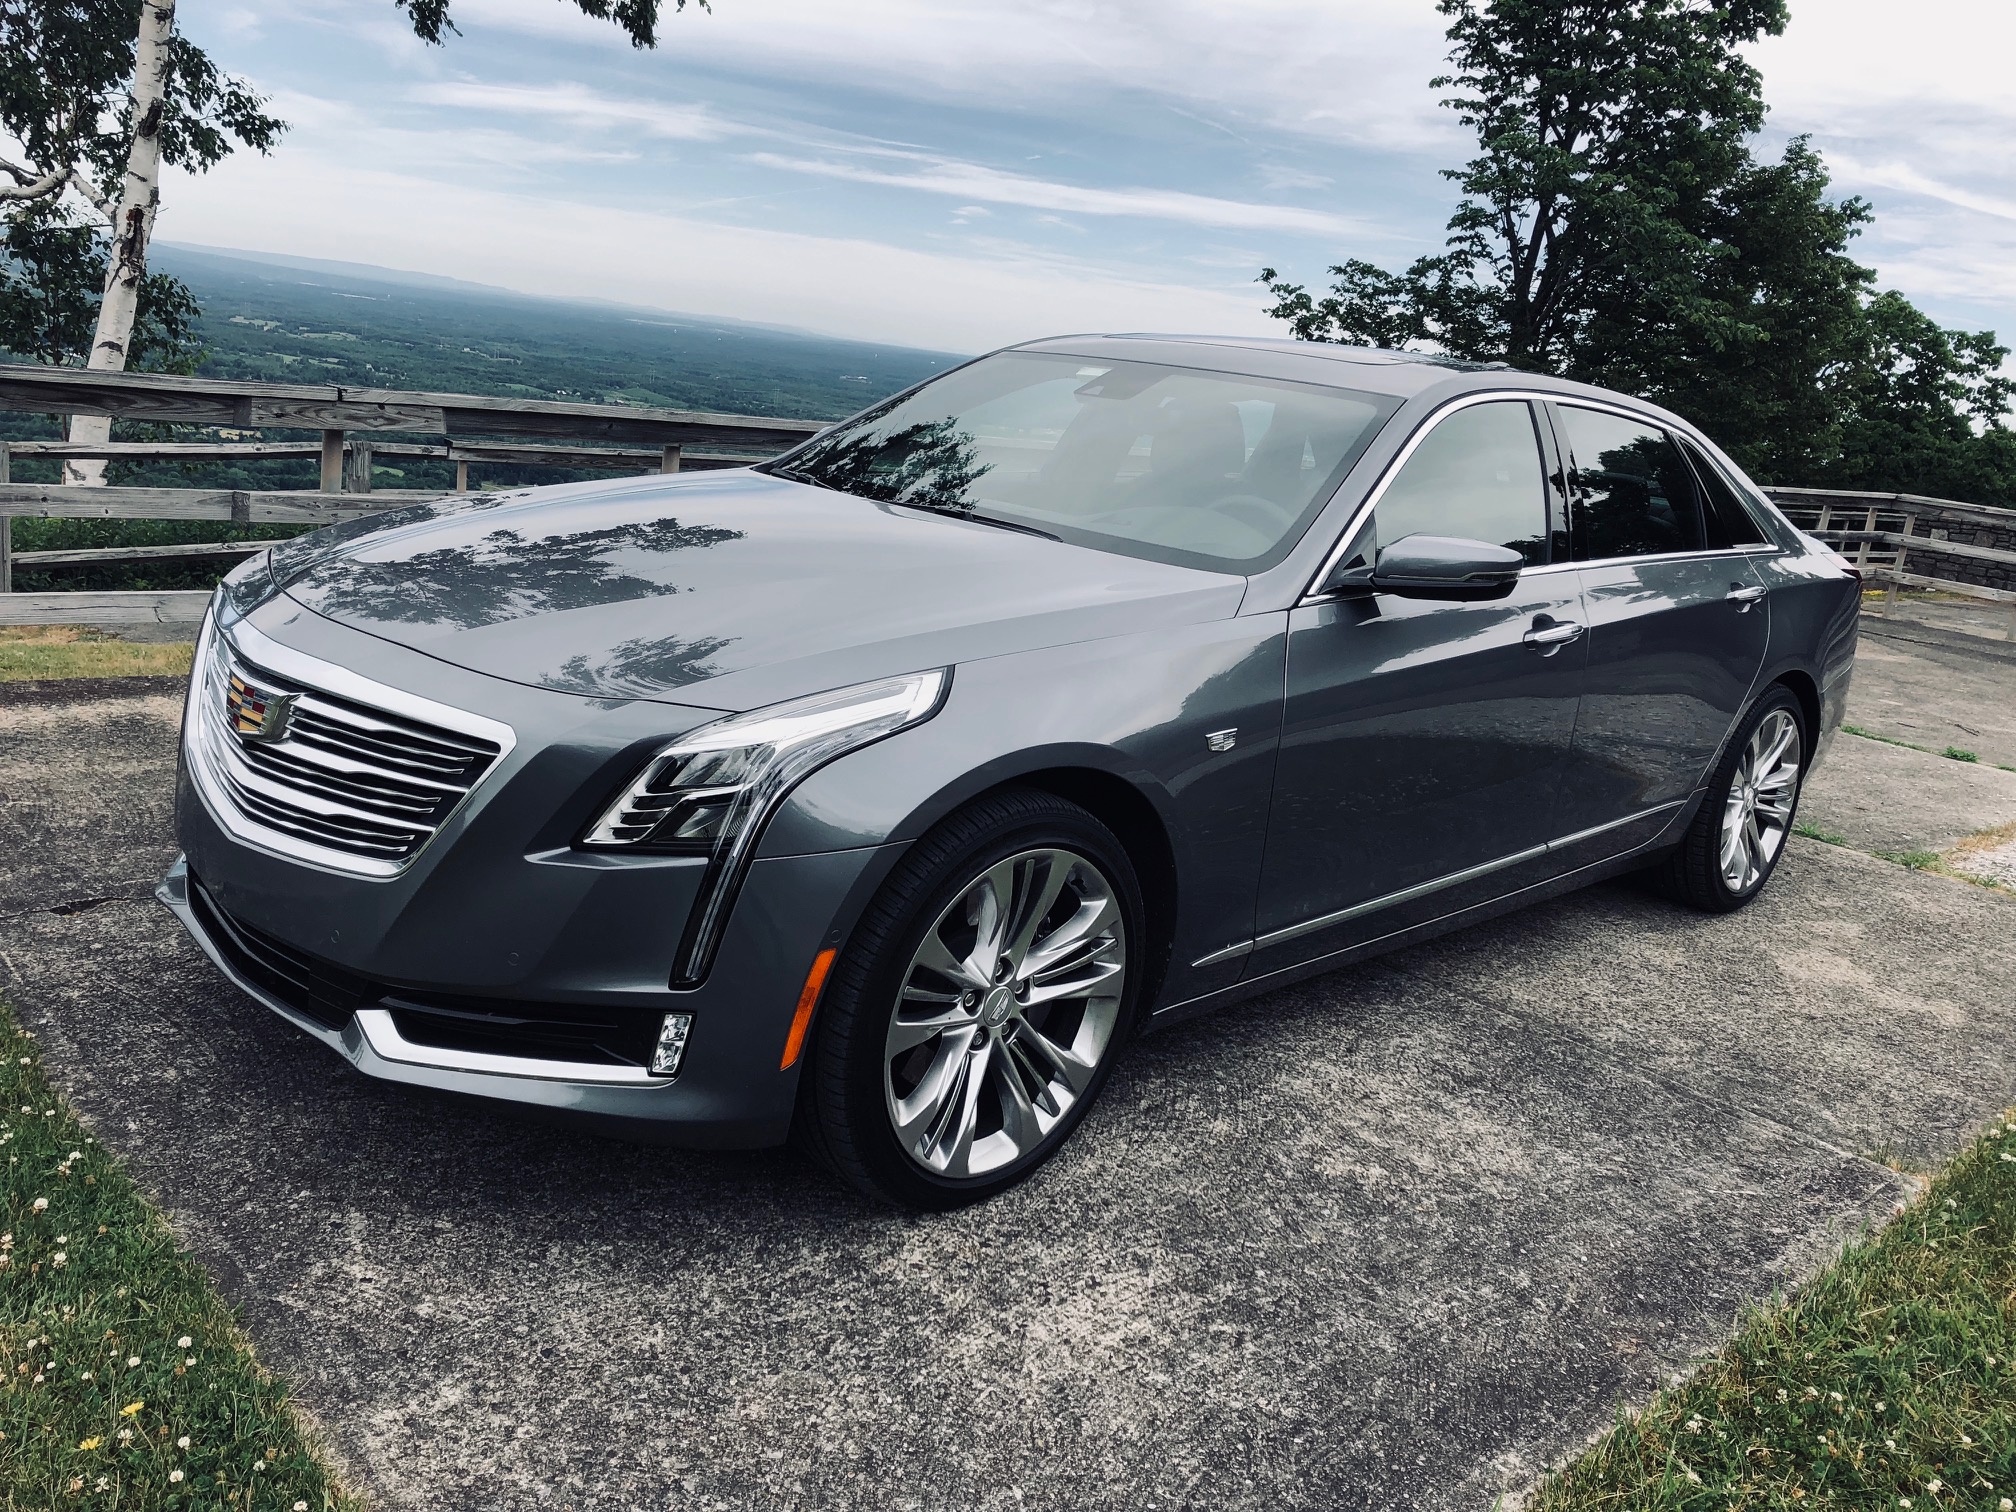 Cadillac CT6 2018 Video Review By Auto Critic Steve Hammes